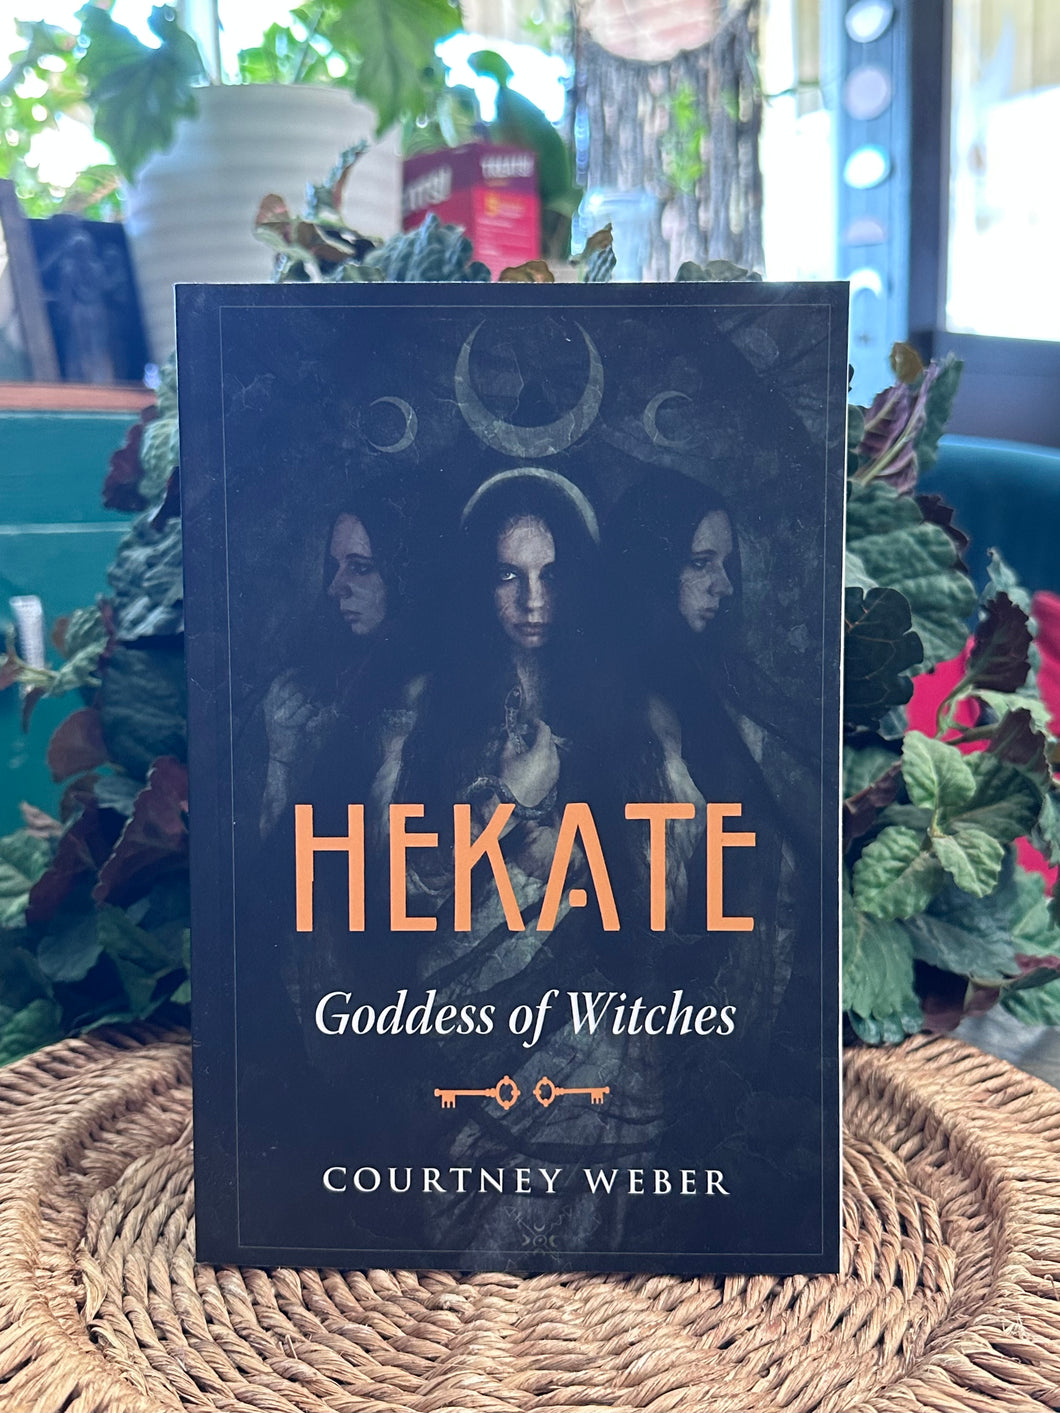 Hekate:Goddess of Witches